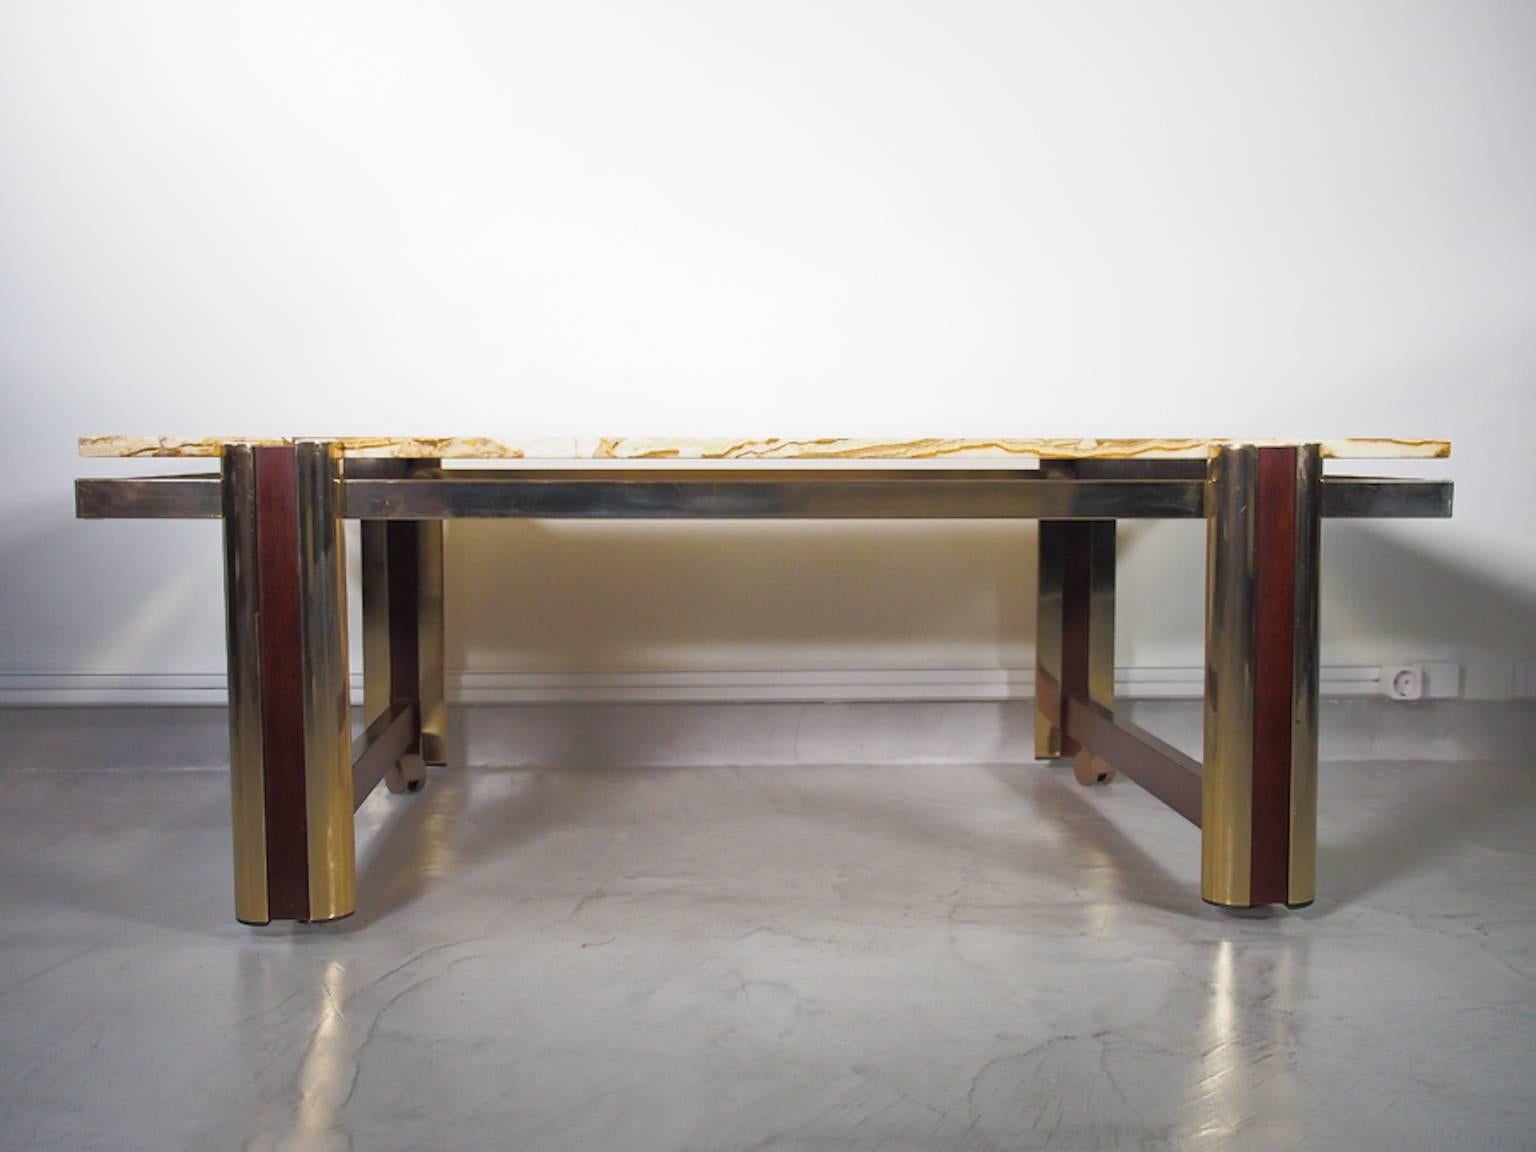 Large marble coffee table with brass frame and wooden details. Removable wheels to easily move the table around.